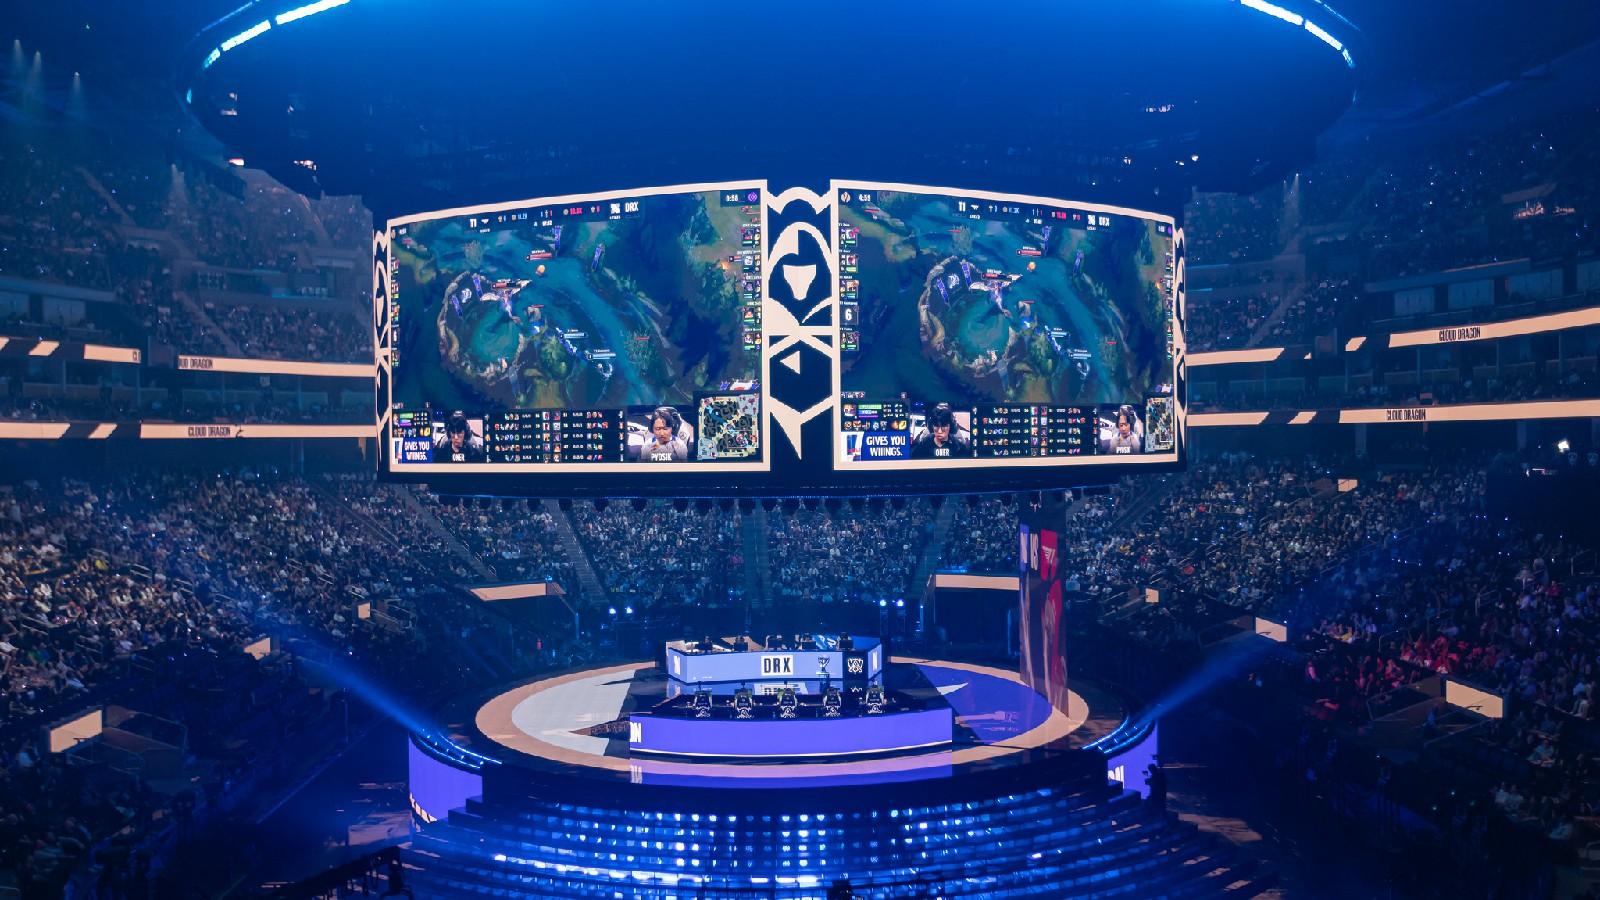 Worlds 2023: All teams qualified for LoL world championship